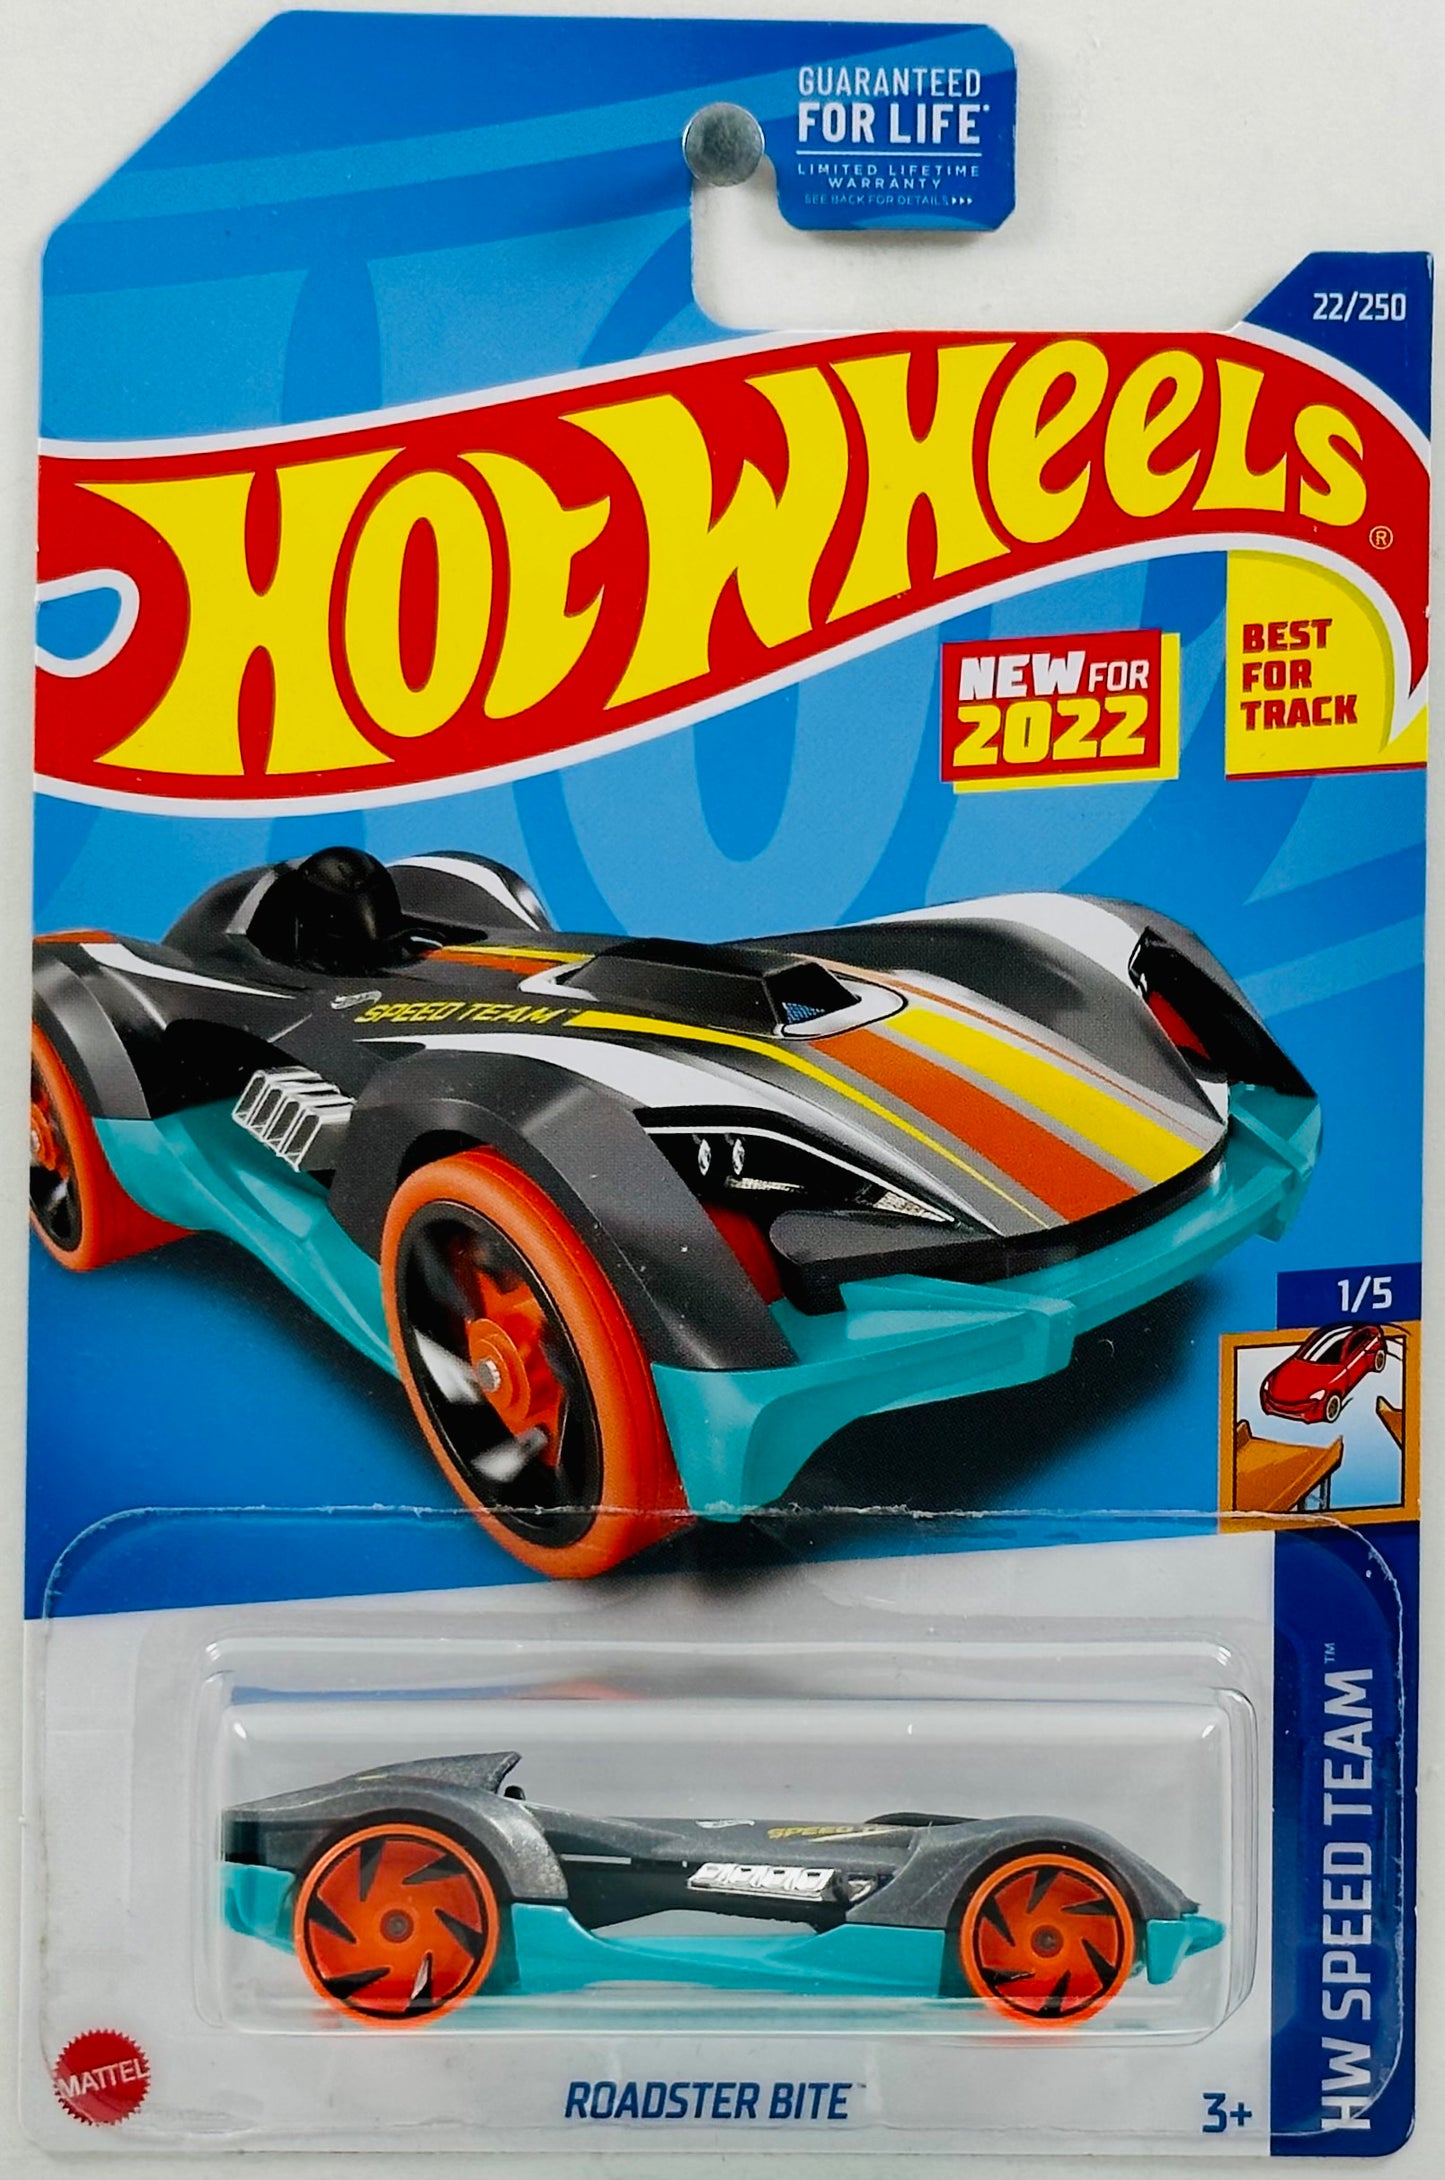 Hot Wheels 2022 - Collector # 022/250 - HW Speed Team 01/05 - New Models - Roadster Bite - Gray - USA